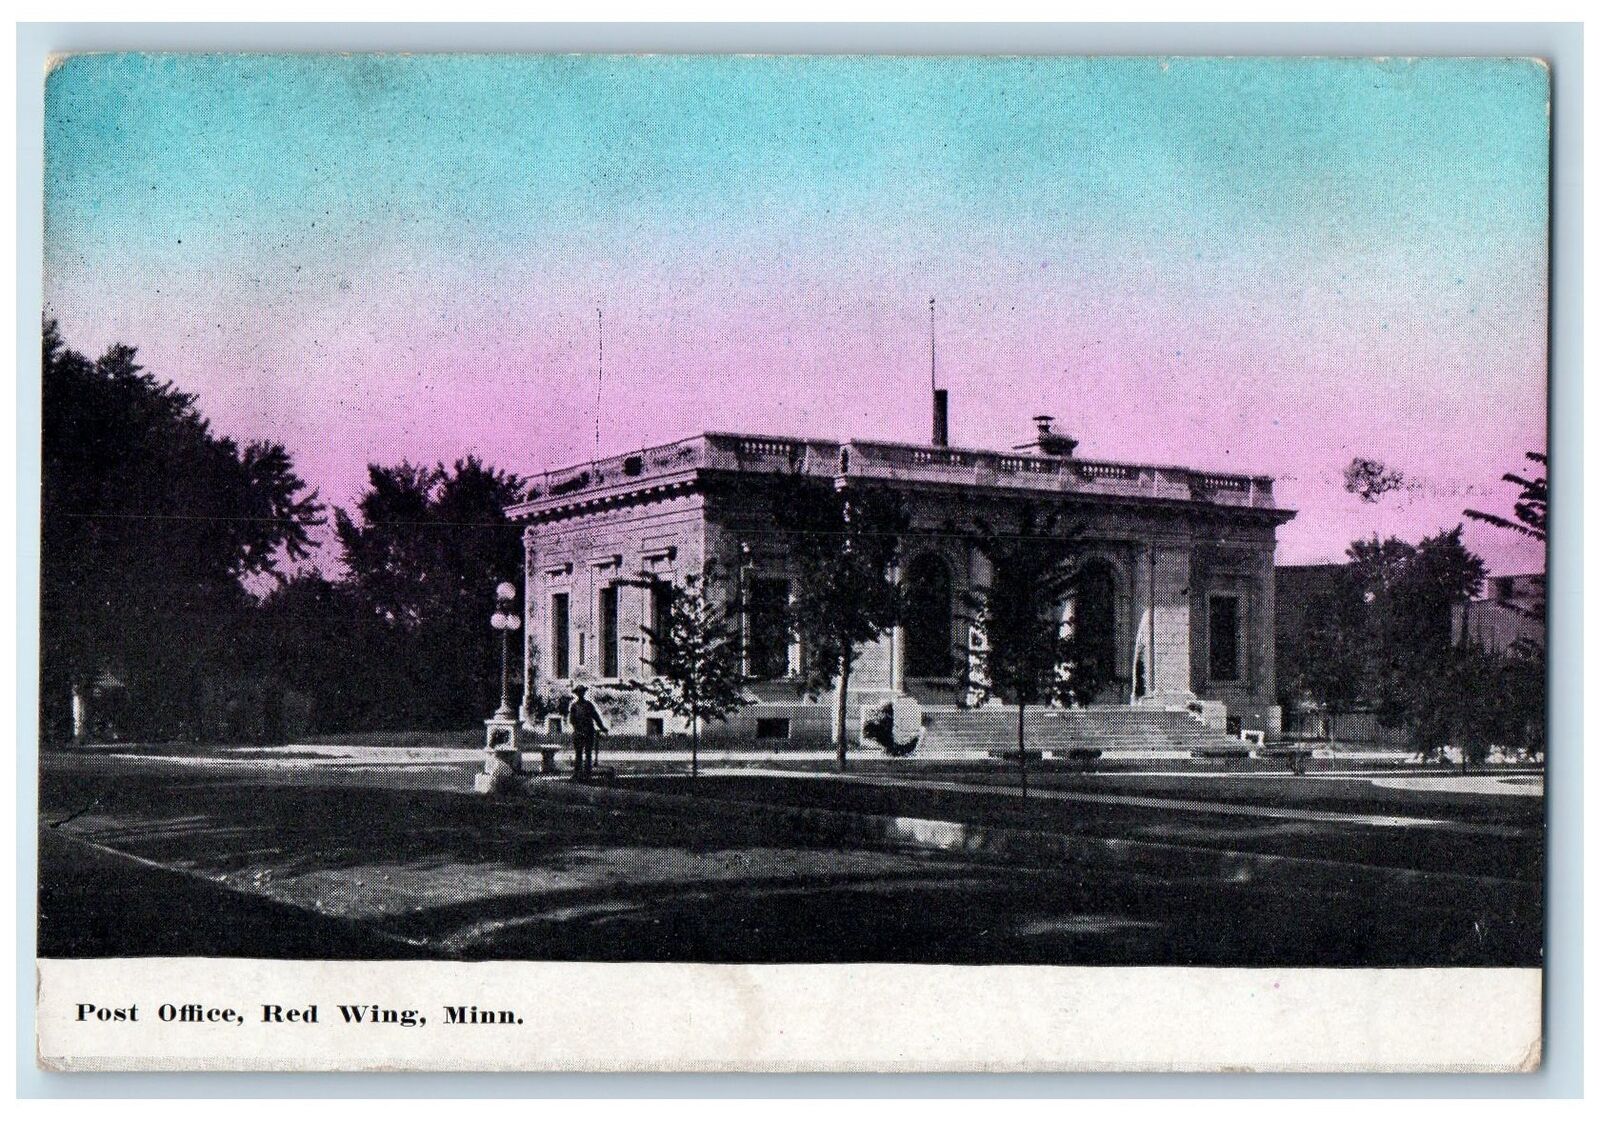 c1920 Post Office Building Dirt Road Stairs Entrance Red Wing Minnesota Postcard